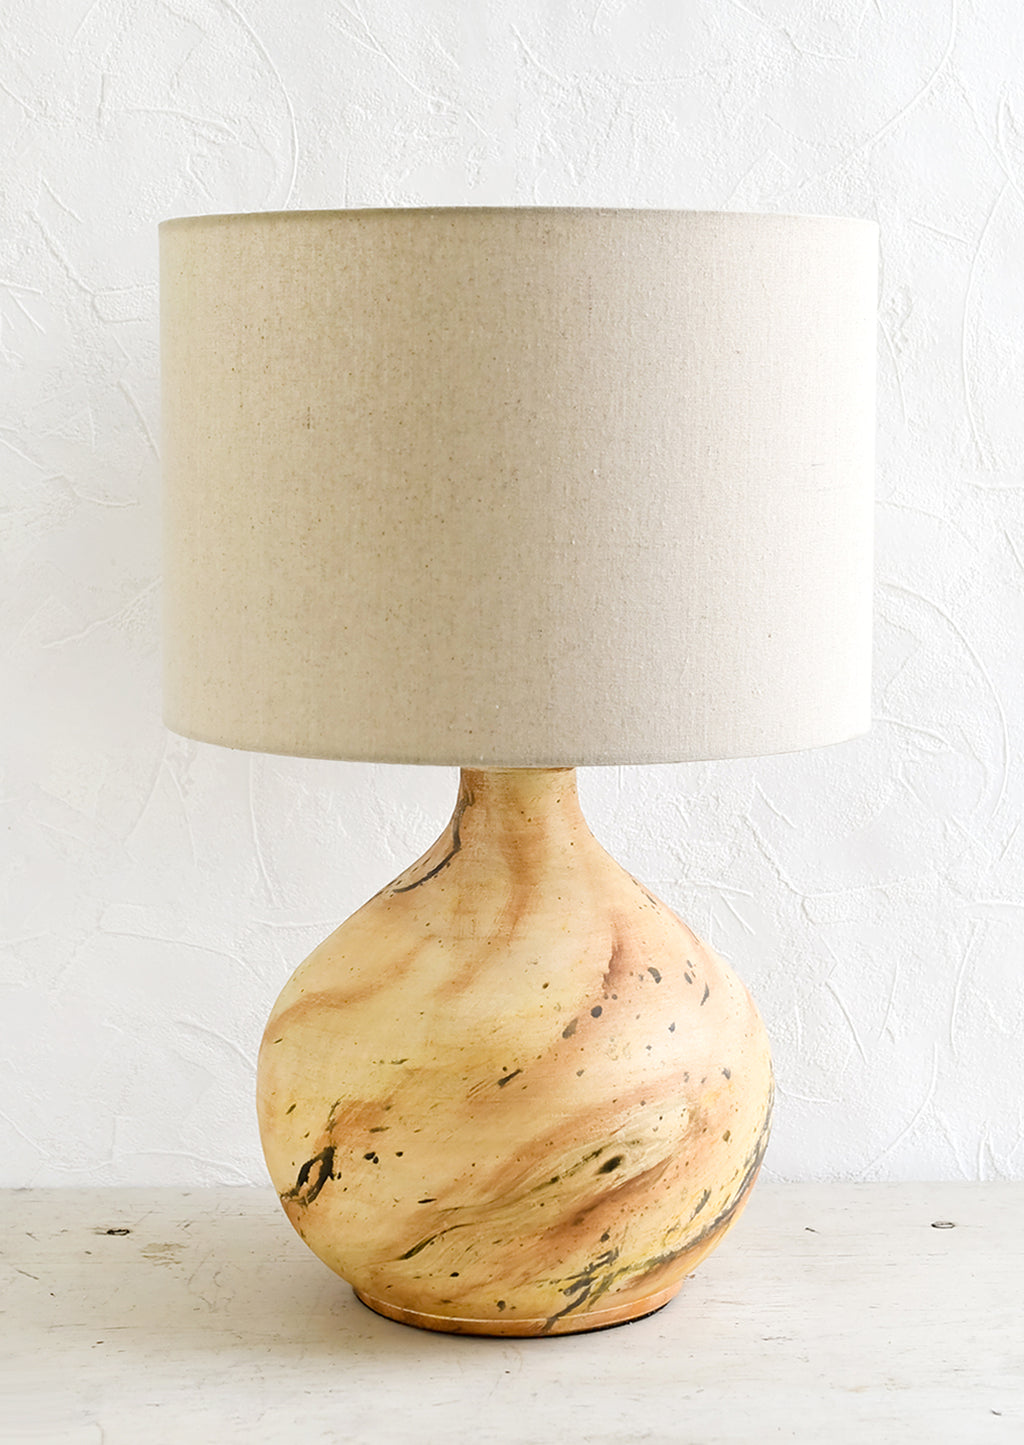 1: A table lamp with round ceramic base with paint splatter effect and round natural linen shade.